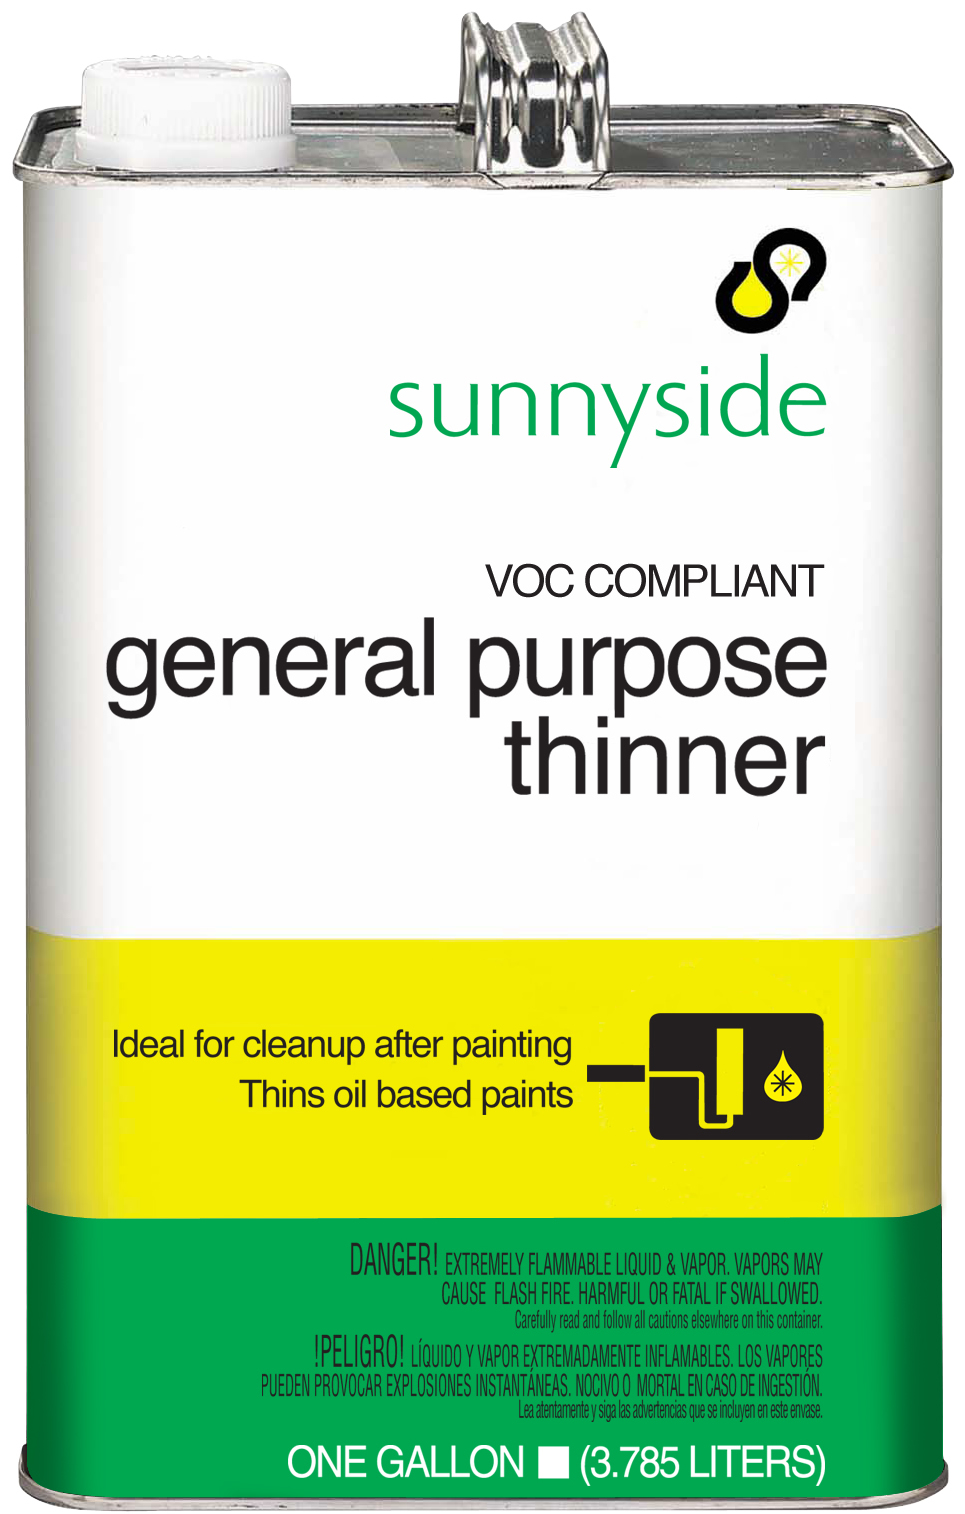 Sunnyside Corporation - Downloadable Product Information